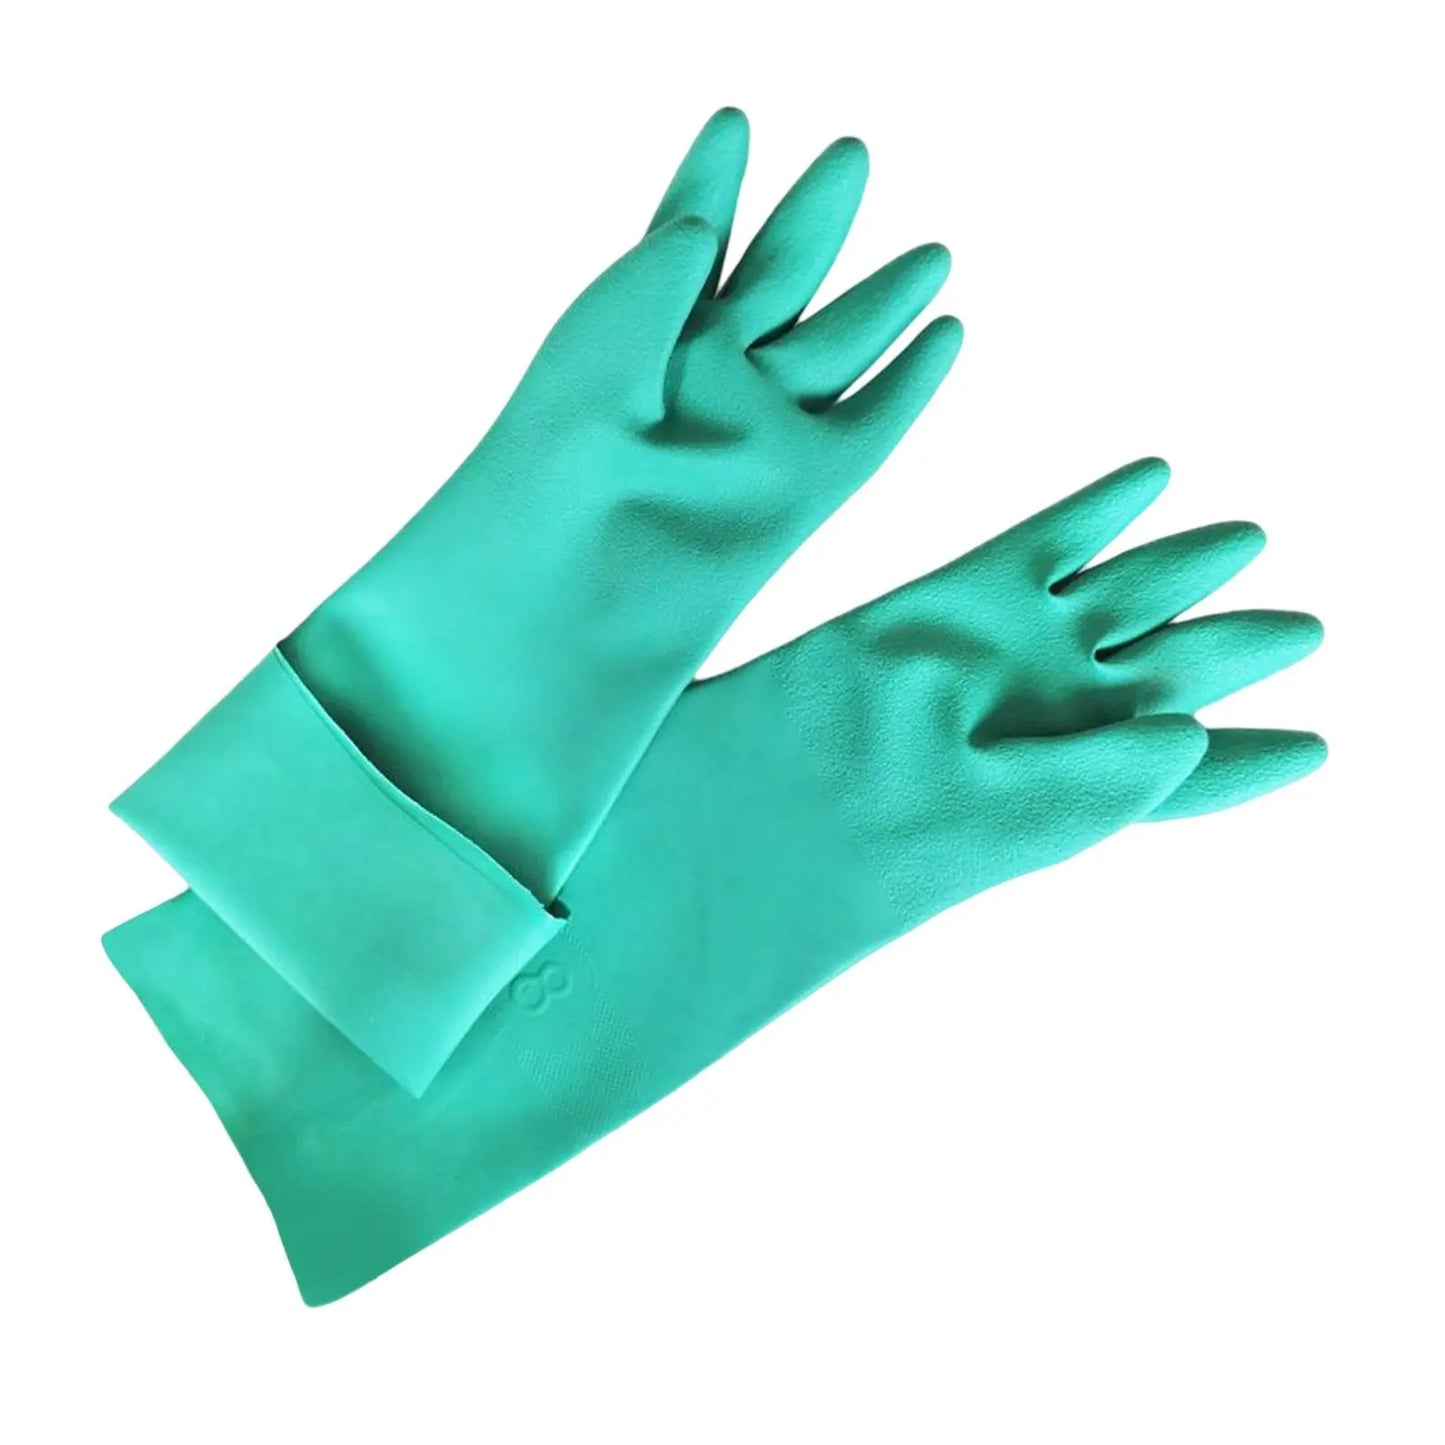 Long Nitrile Gloves Industrial Washing Waterproof Reusable for Gardening  Decor Harmony